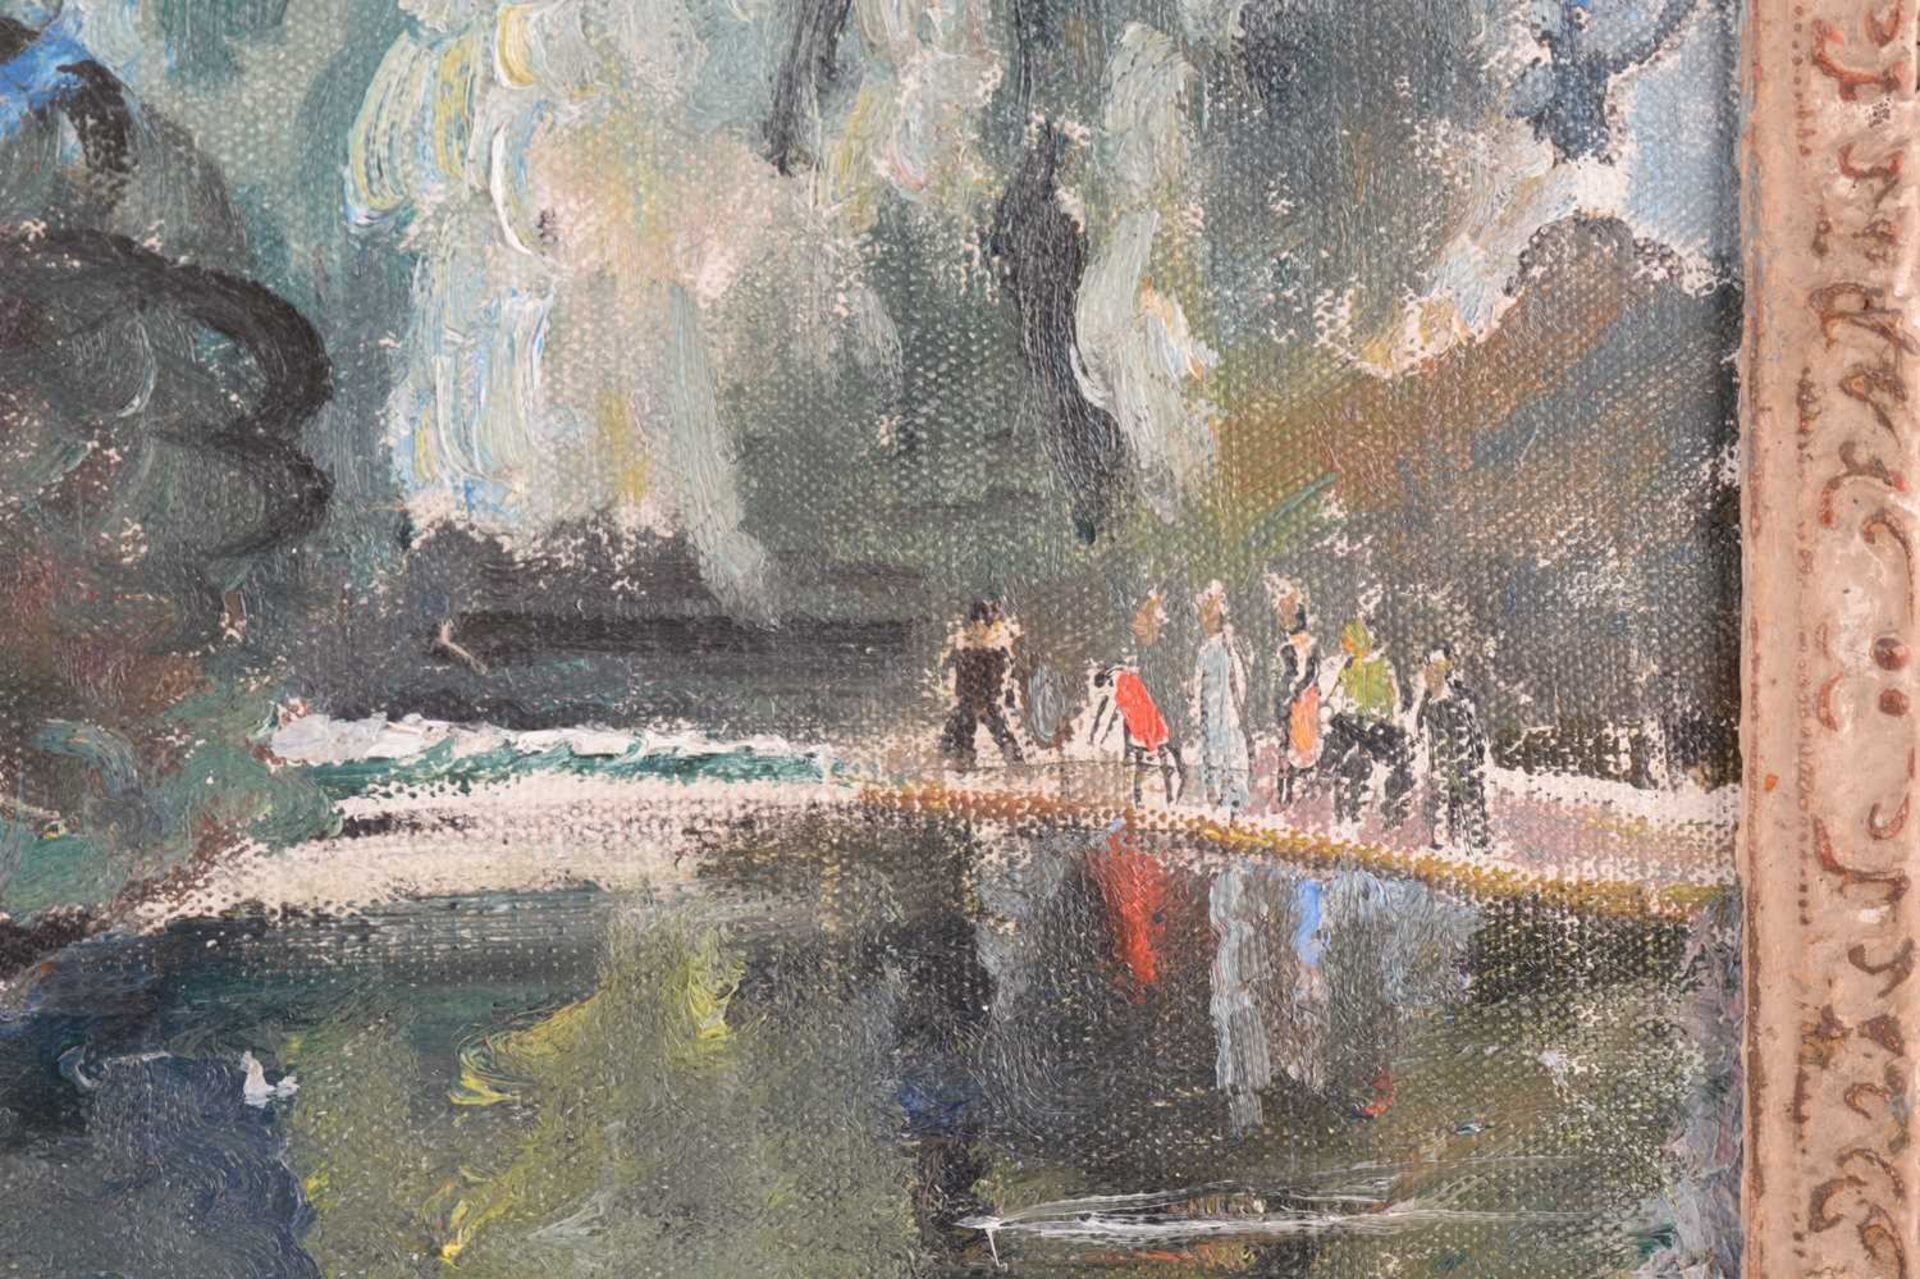 Cathleen S Mann (1896-1959), St James’ Park, signed and dated 1943, oil on canvas, 50 x 60cm, - Image 6 of 12